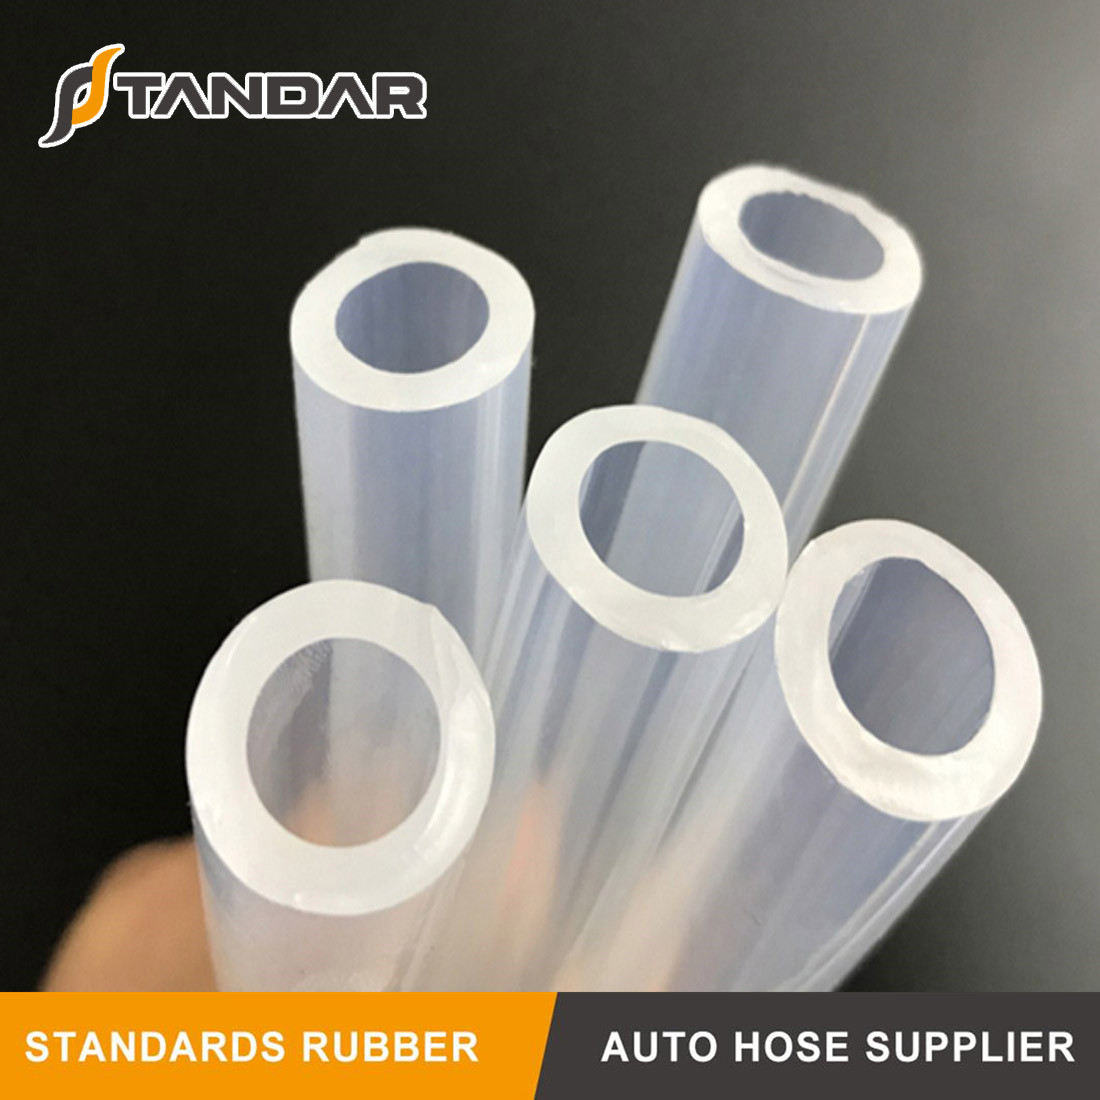 How safe is the food grade silicone hose?